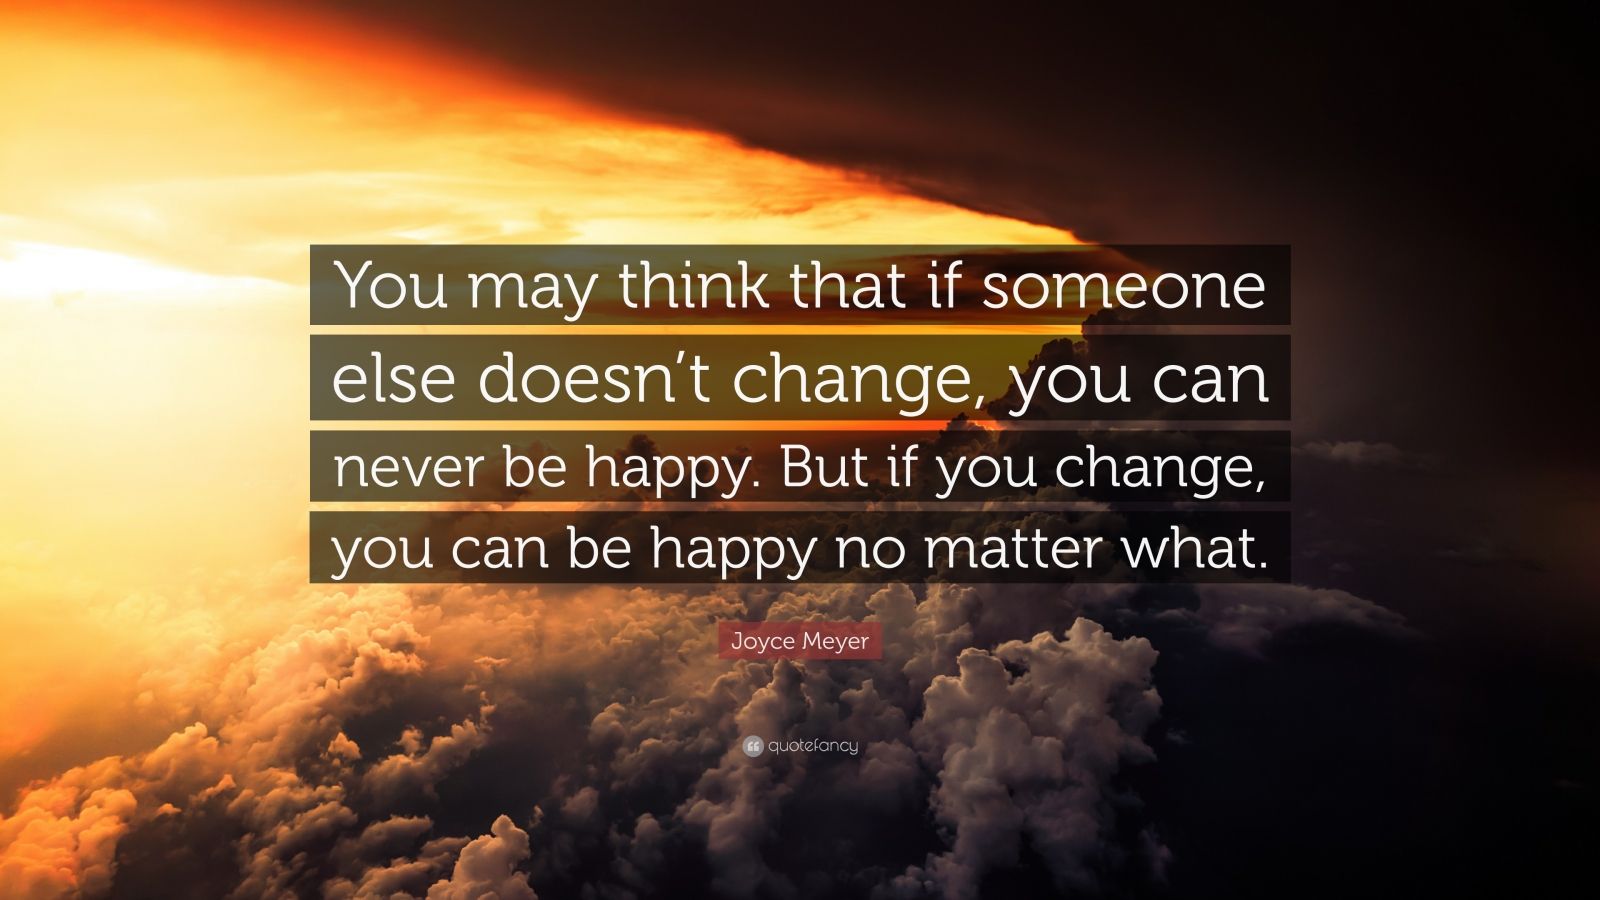 Joyce Meyer Quote: “You may think that if someone else doesn’t change ...